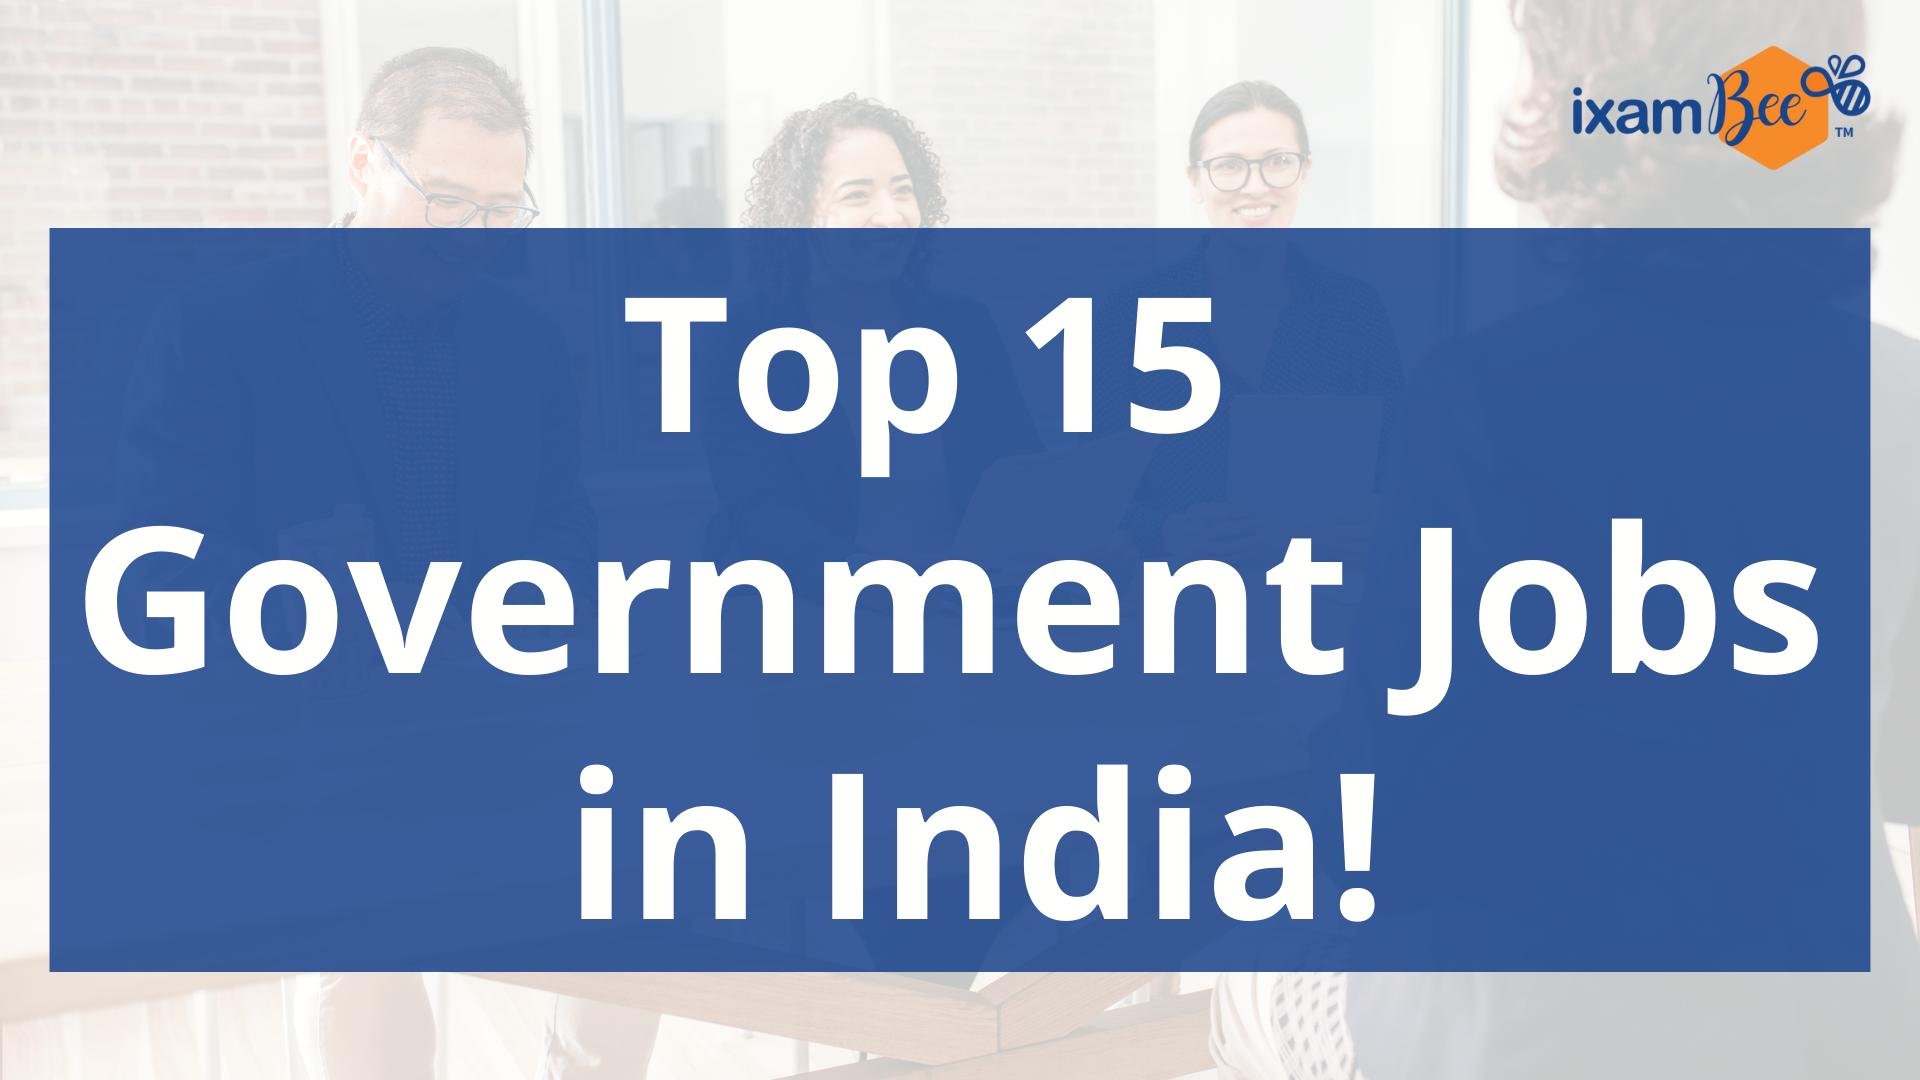 Top 15 Government Jobs in India